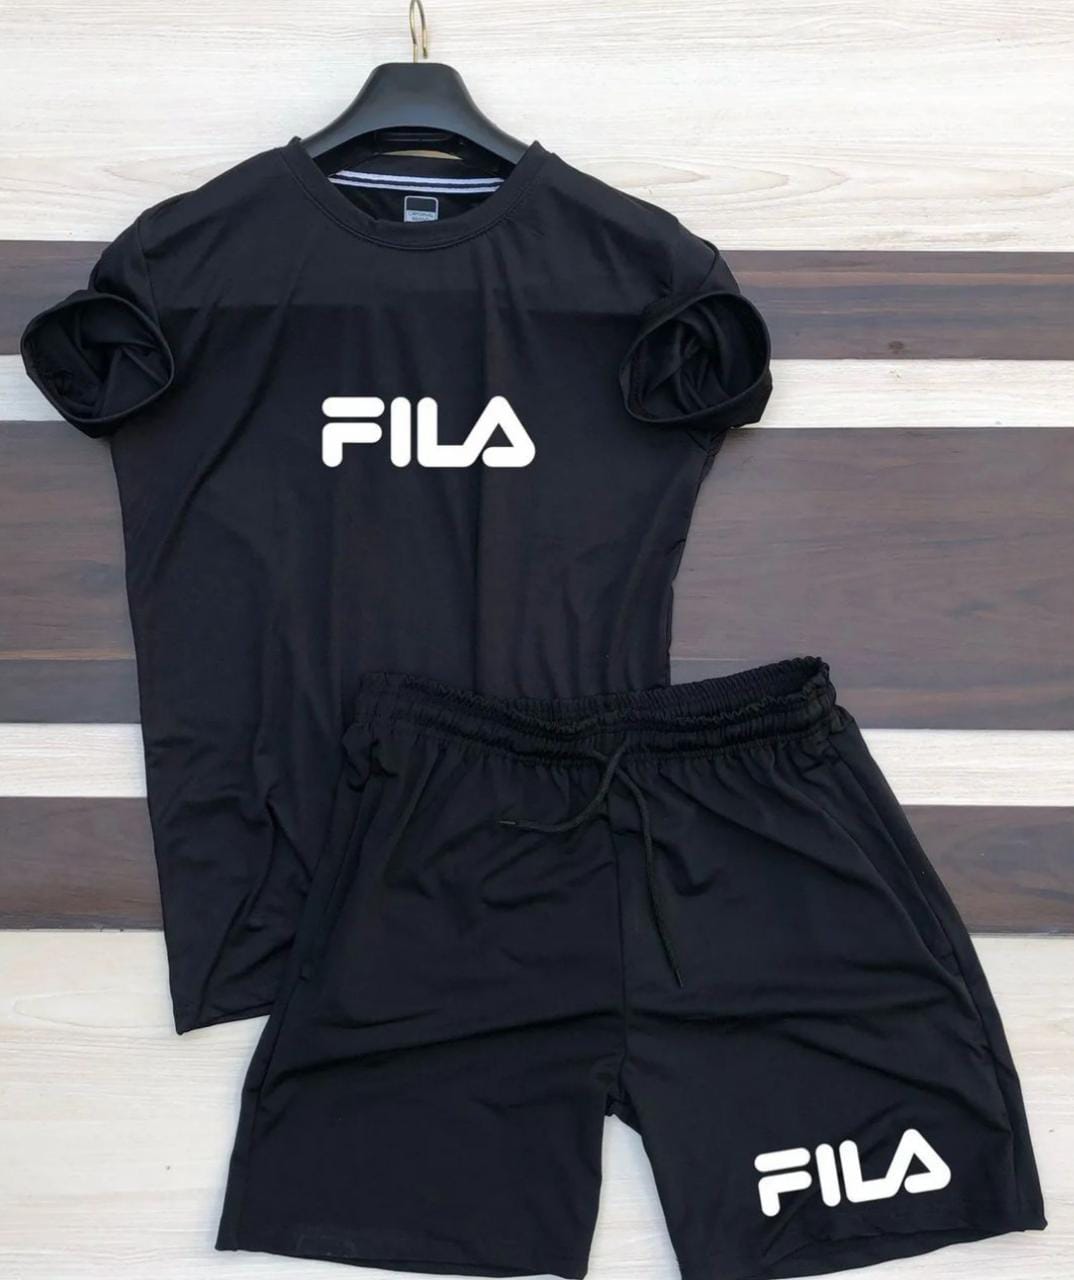 Details View - Fila T-Shirt and Shorts photos - reseller,reseller marketplace,advetising your products,reseller bazzar,resellerbazzar.in,india's classified site,Fila T-Shirt and Shorts | Fila T-Shirt | Fila Shorts | Fila T-Shirt and Shorts in Ahmedabad